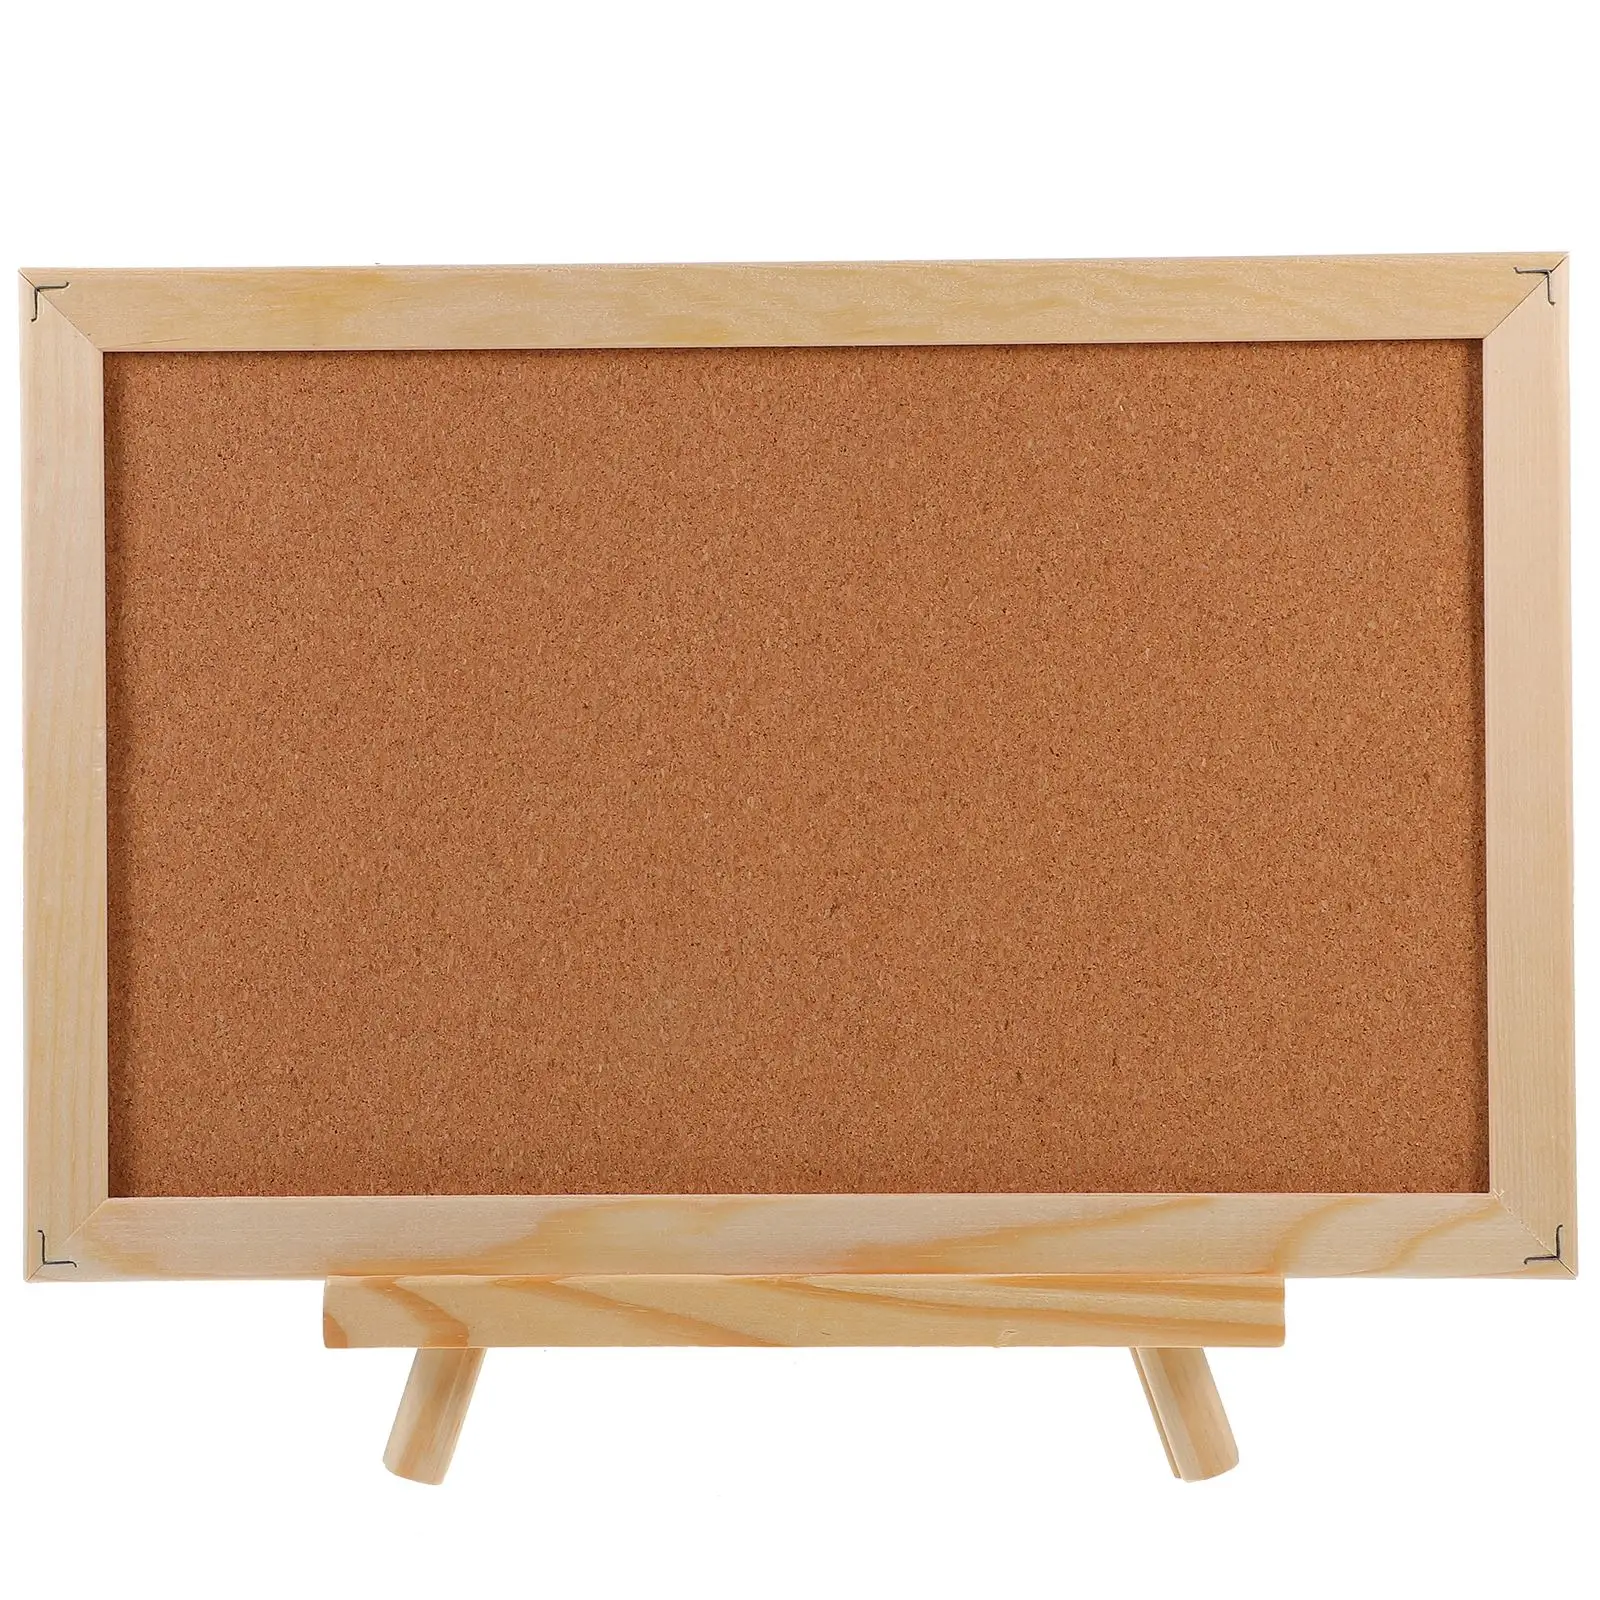 Durable Cork Wood Wall Hanging Message Bulletin Board Frame Notice Note Memo Board For Home Office Shop School Photo Background